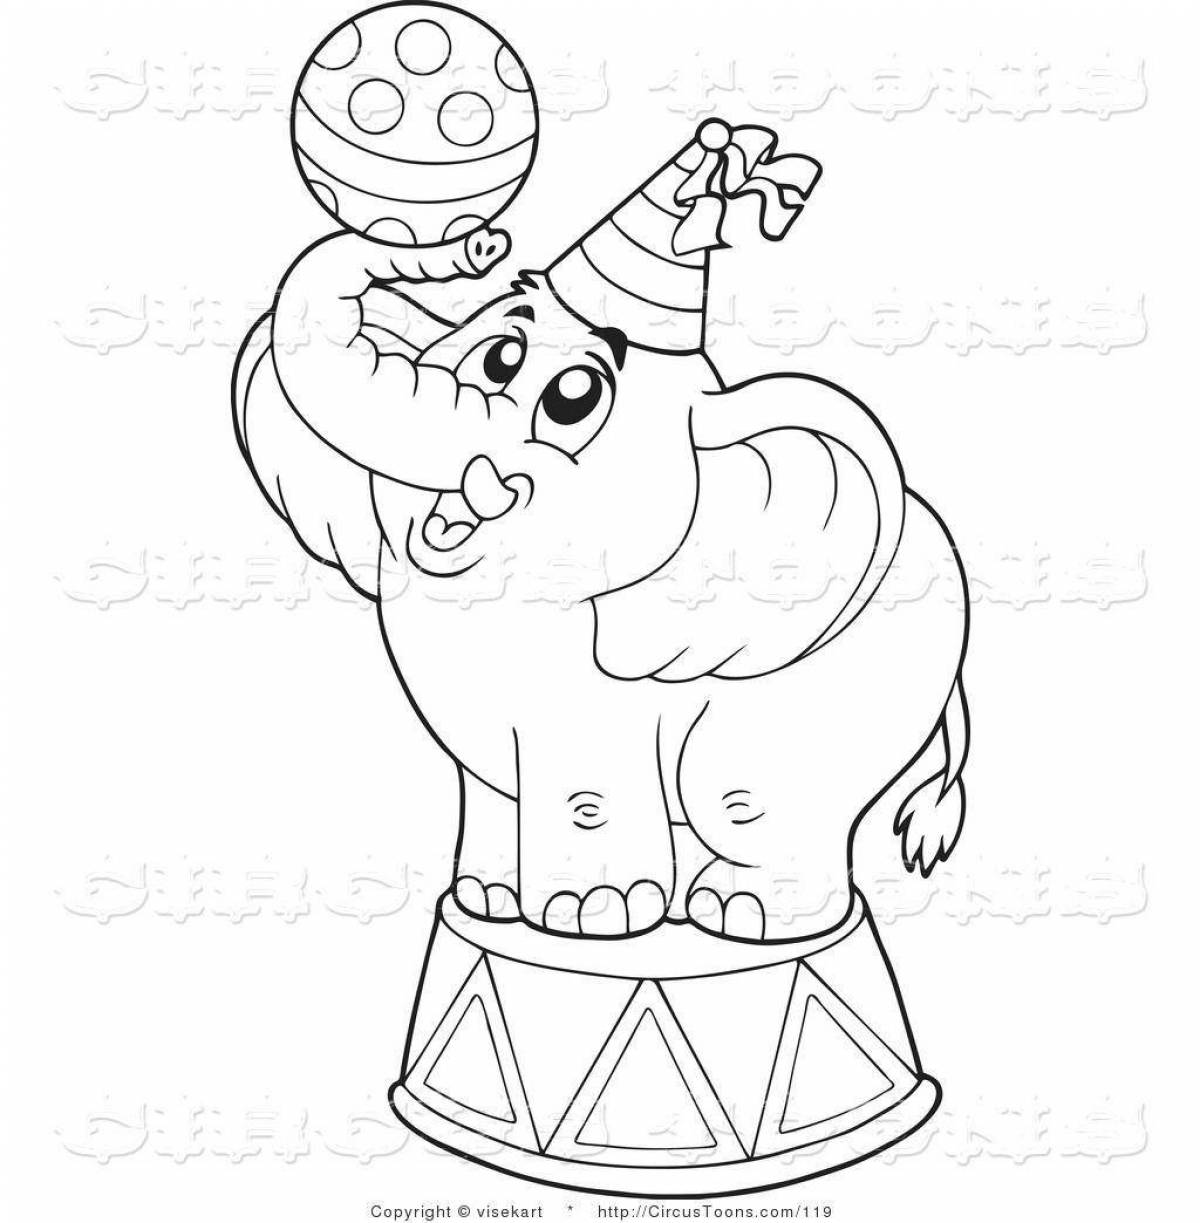 Colorful circus coloring book for kids